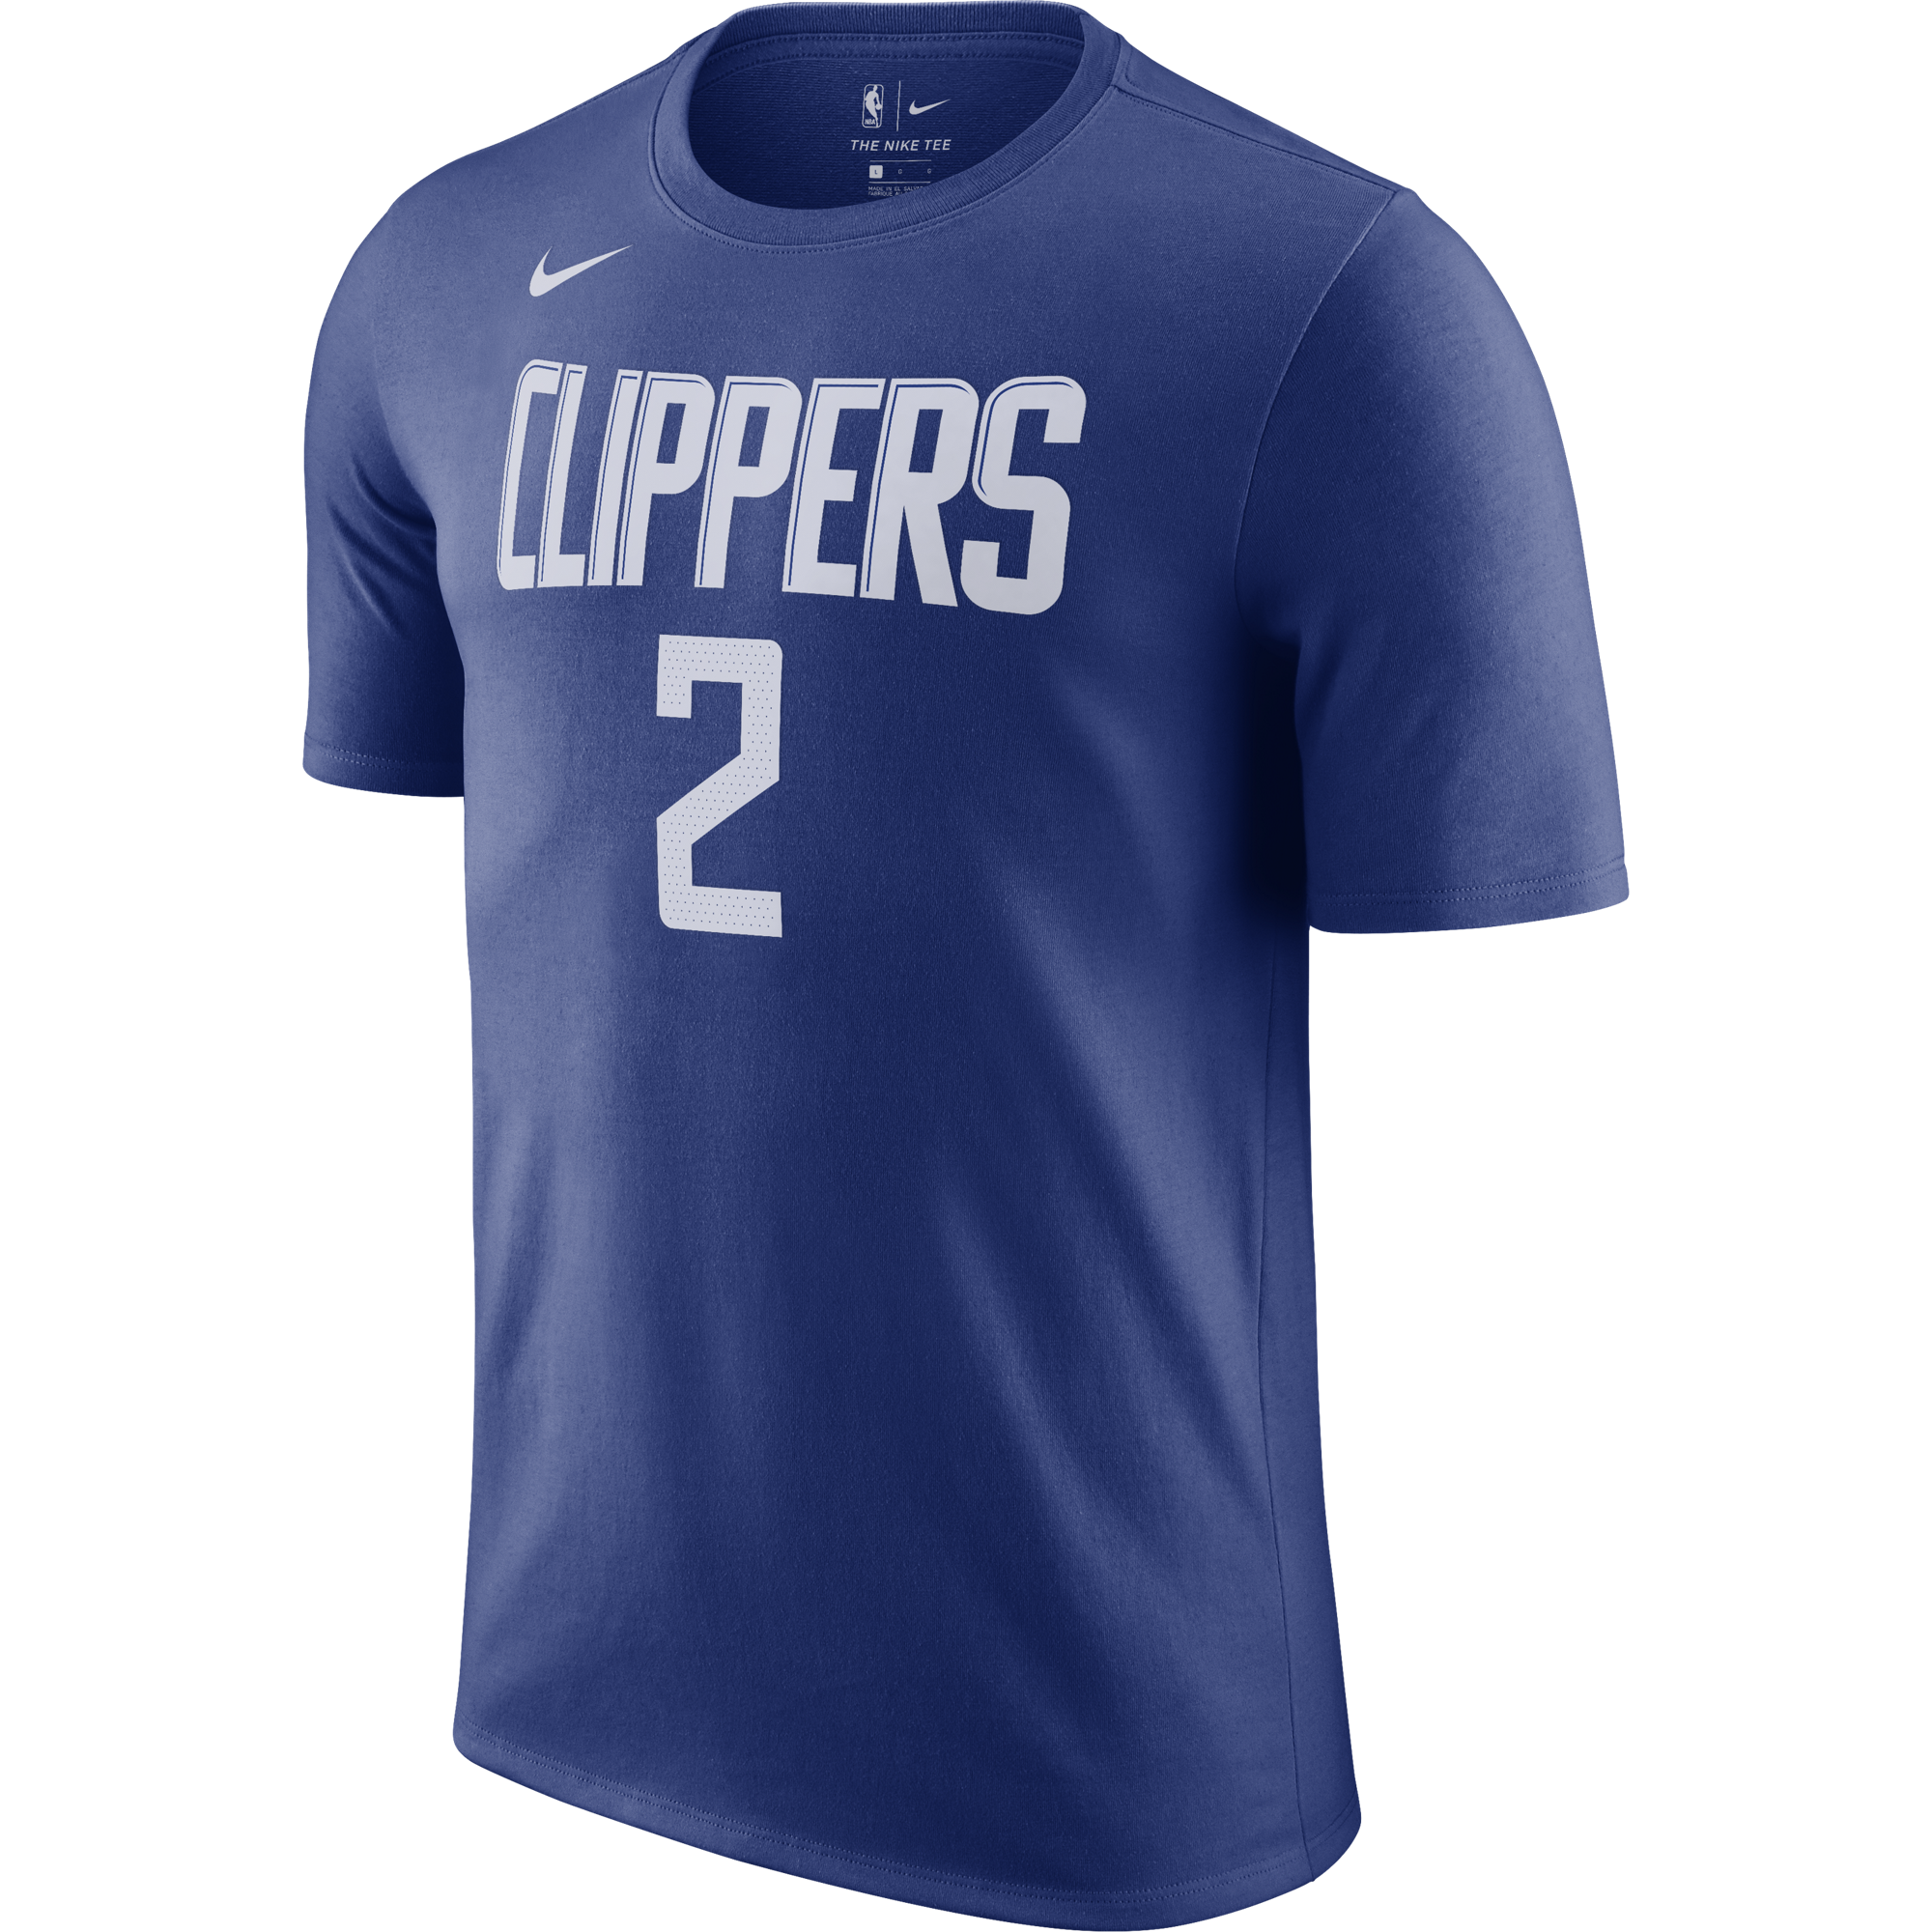 Los Angeles Clippers Kawhi Leonard 2020 White Classic Jersey